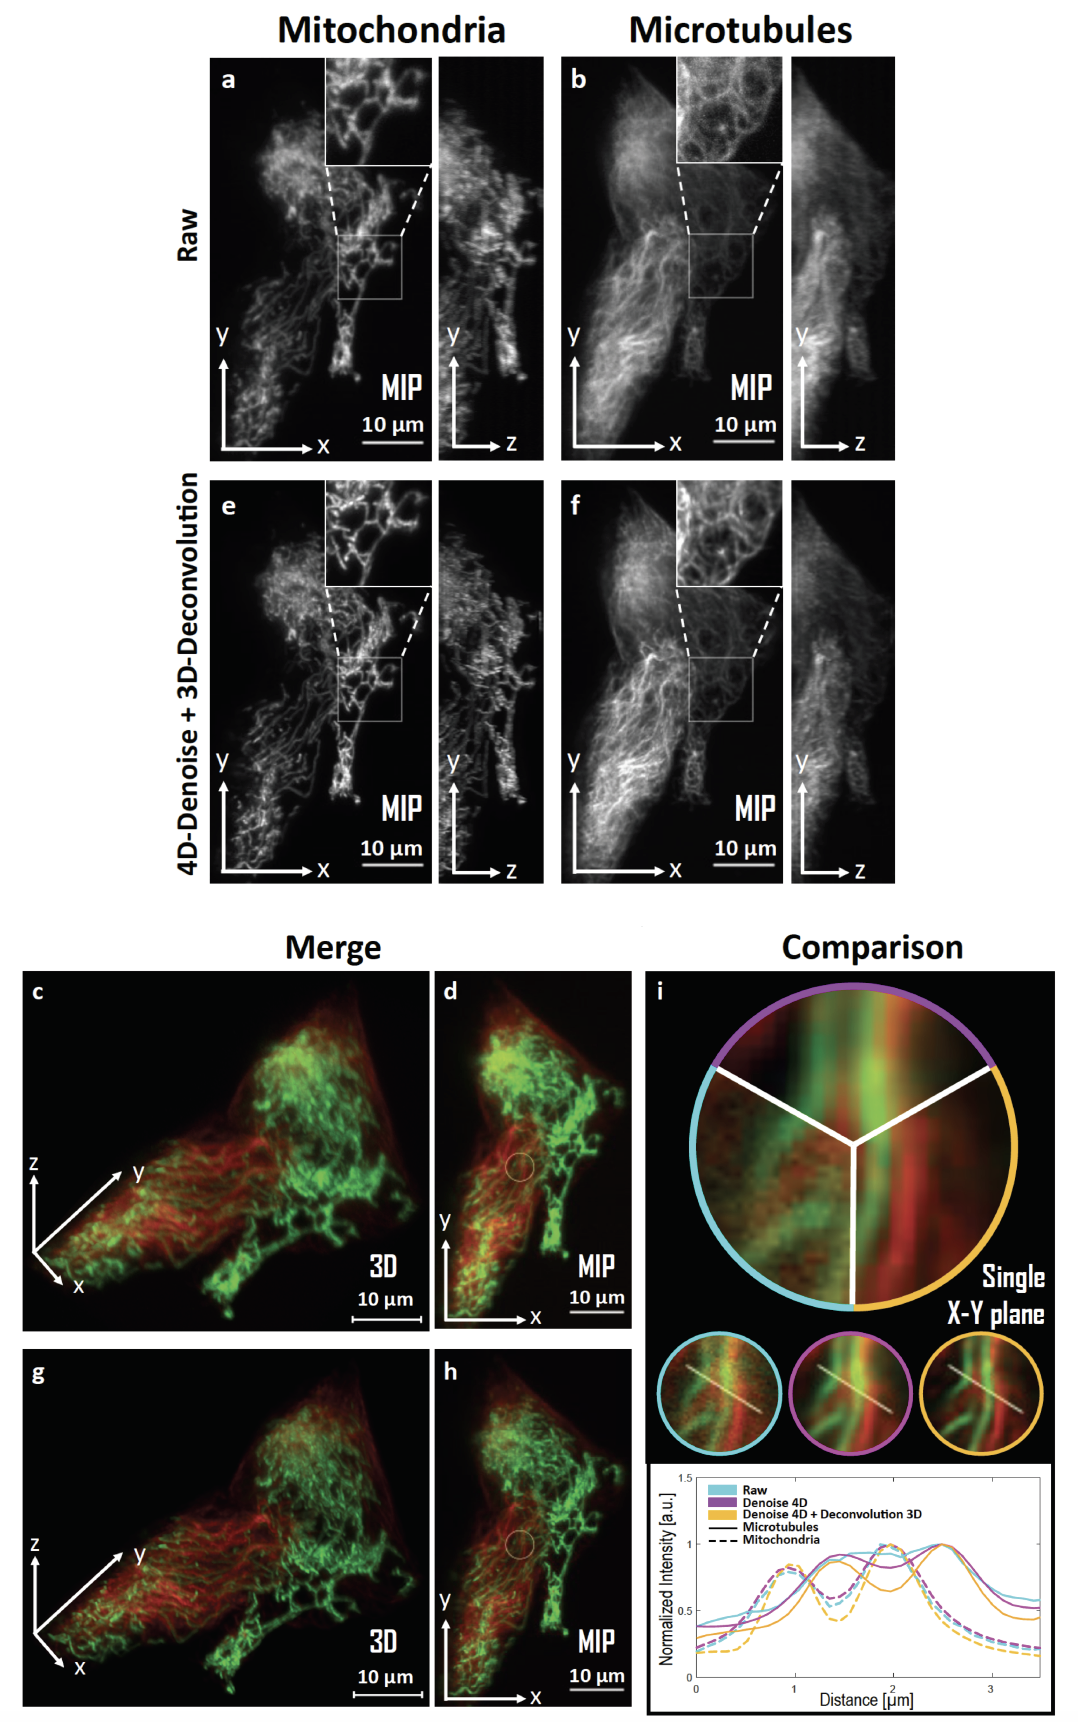 SPITFIR(e) for 4D-denoising, background subtraction, and 3D-deconvolution on LLSM images. 60 planes 3D volumes of live RPE1 cells double stained with PKMR for Mitochondria (a,e) and with Tubulin TrackerTM^{TM} Deep Red for Microtubules (b,f) were acquired within 2.2s2.2s per stack using lattice light-sheet microscopy. MIP of representative raw (see Material and Methods section) images for Mitochondria and Microtubules, respectively, before (a,b) and after (e, f) SPITFIR(e) 4D denoising and 3D deconvolution (3D Gaussian PSF, σxy=1.5\sigma _{xy} =1.5 pixels and σz=1.0\sigma _{z} =1.0 pixel). Insets are zoomed area illustrating SPITFIR(e) improvement in spatial resolution and SNR. 3D angular views and MIP of composite images before (c,d) and after (g,h) SPITFIR(e) treatment (Red for Microtubules; Green for Mitochondria). 4D denoising SPITFIR(e) image improvement shown on a single x-y plane (i) zoomed from the inset indicated in (d, h). Raw image is indicated as a blue lined sector in the upper part and in the left circle, beneath; 4D denoised image is similarly indicated in magenta, while the 4D denoised + 3D deconvolved image is in yellow. Intensity line profiles were measured as indicated in the 3 circles and plotted for each processing step and both Mitochondria and Microtubules at the lower part of (i).